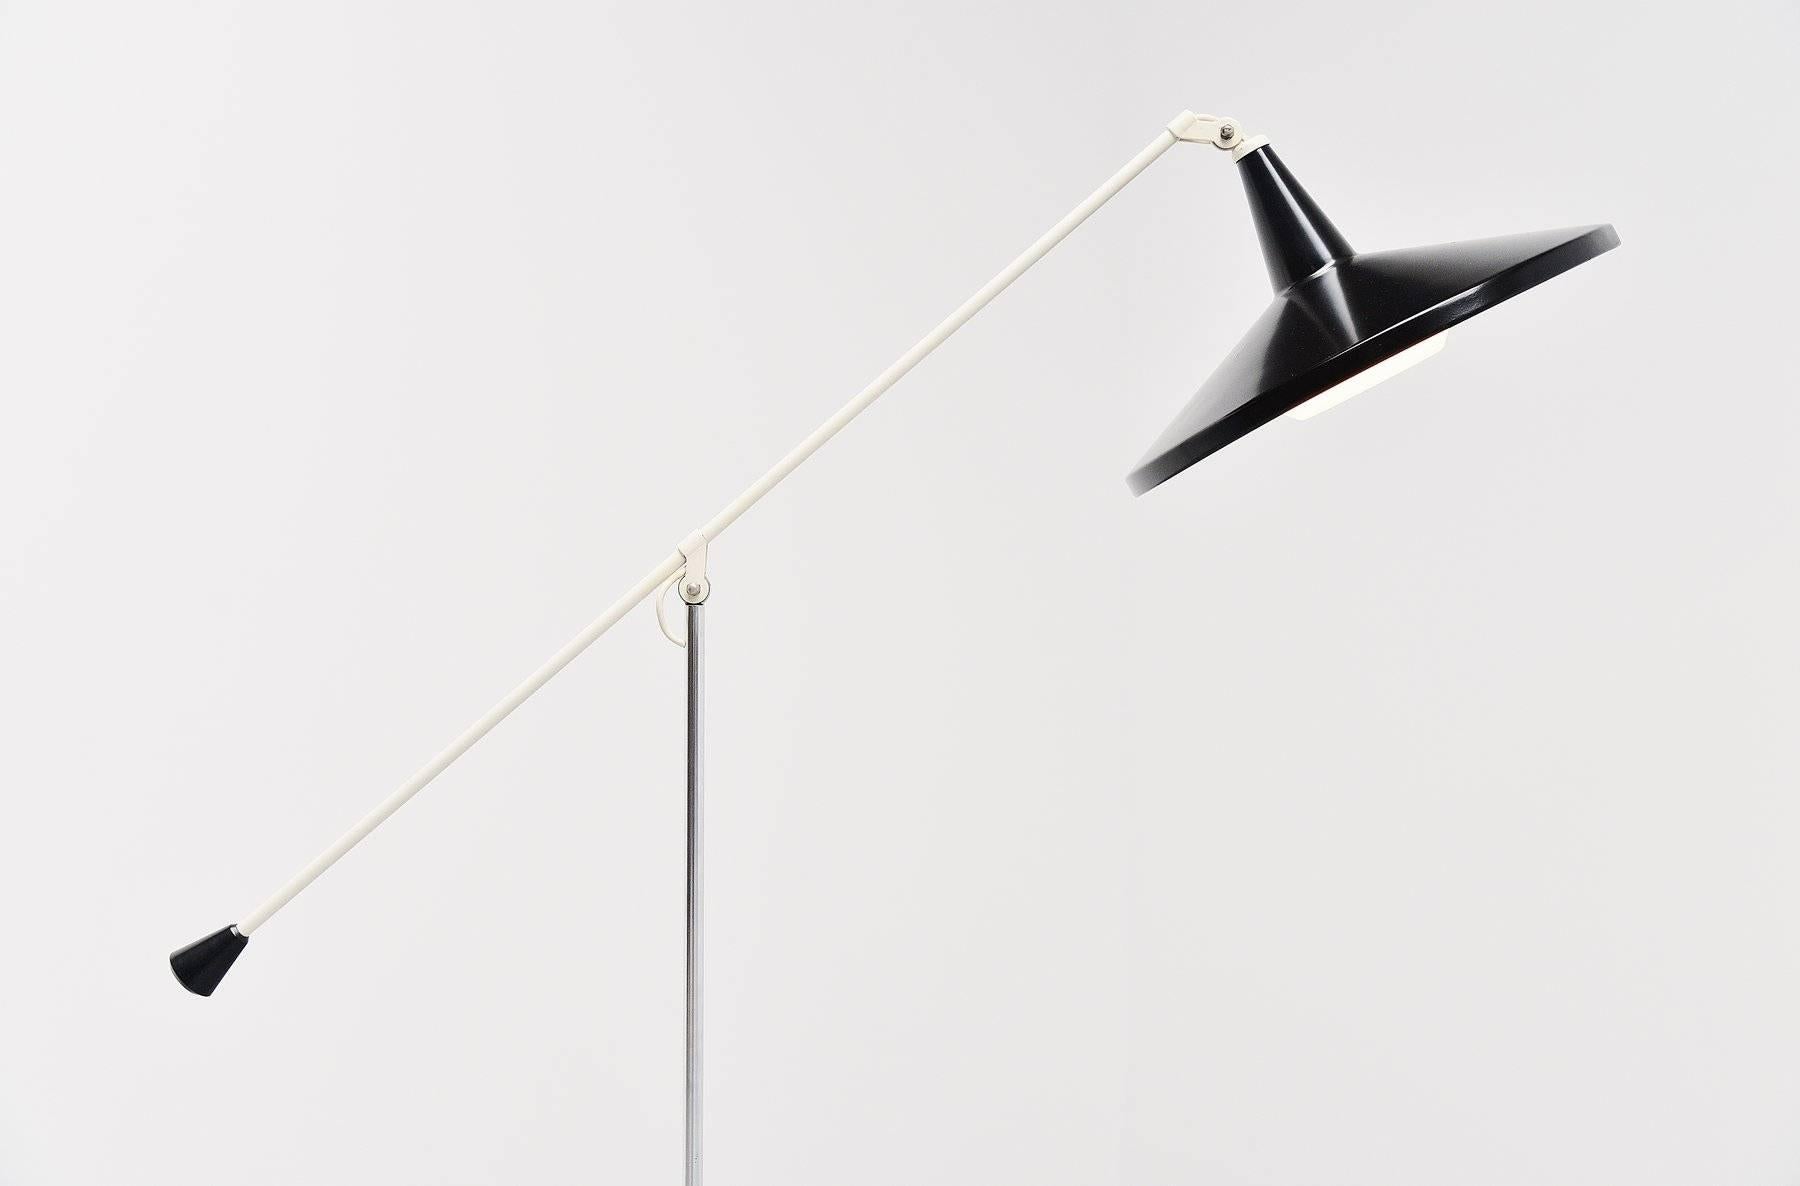 Very nice Industrial floor lamp designed by Wim Rietveld for Gispen Culemborg, Holland, 1955. This floor lamp has an off-white base and a chrome middle arm. The adjustable arm is made of white lacquered metal and has a black plastic end. The shade